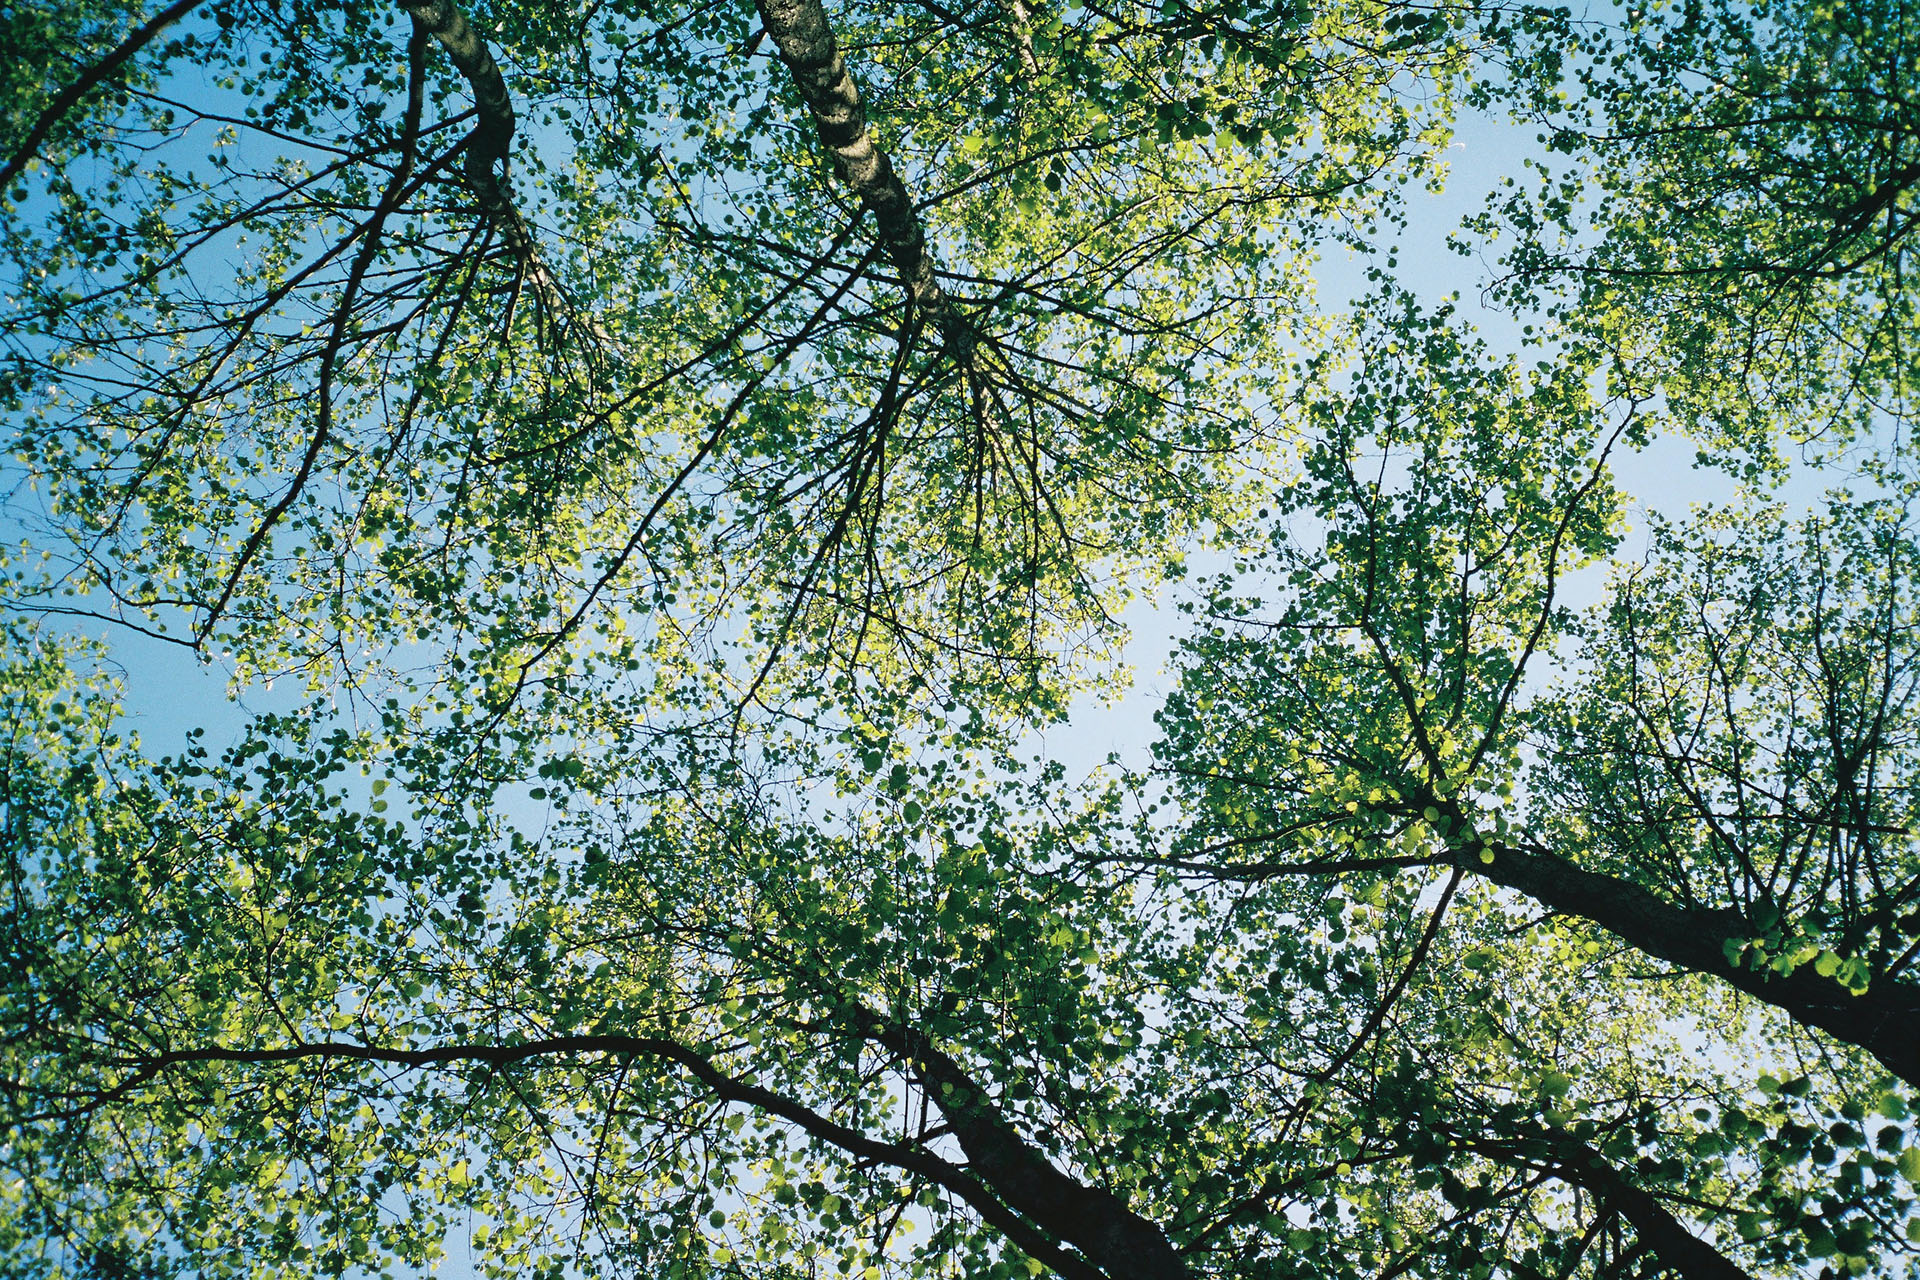 Looking up at trees against a blue sky